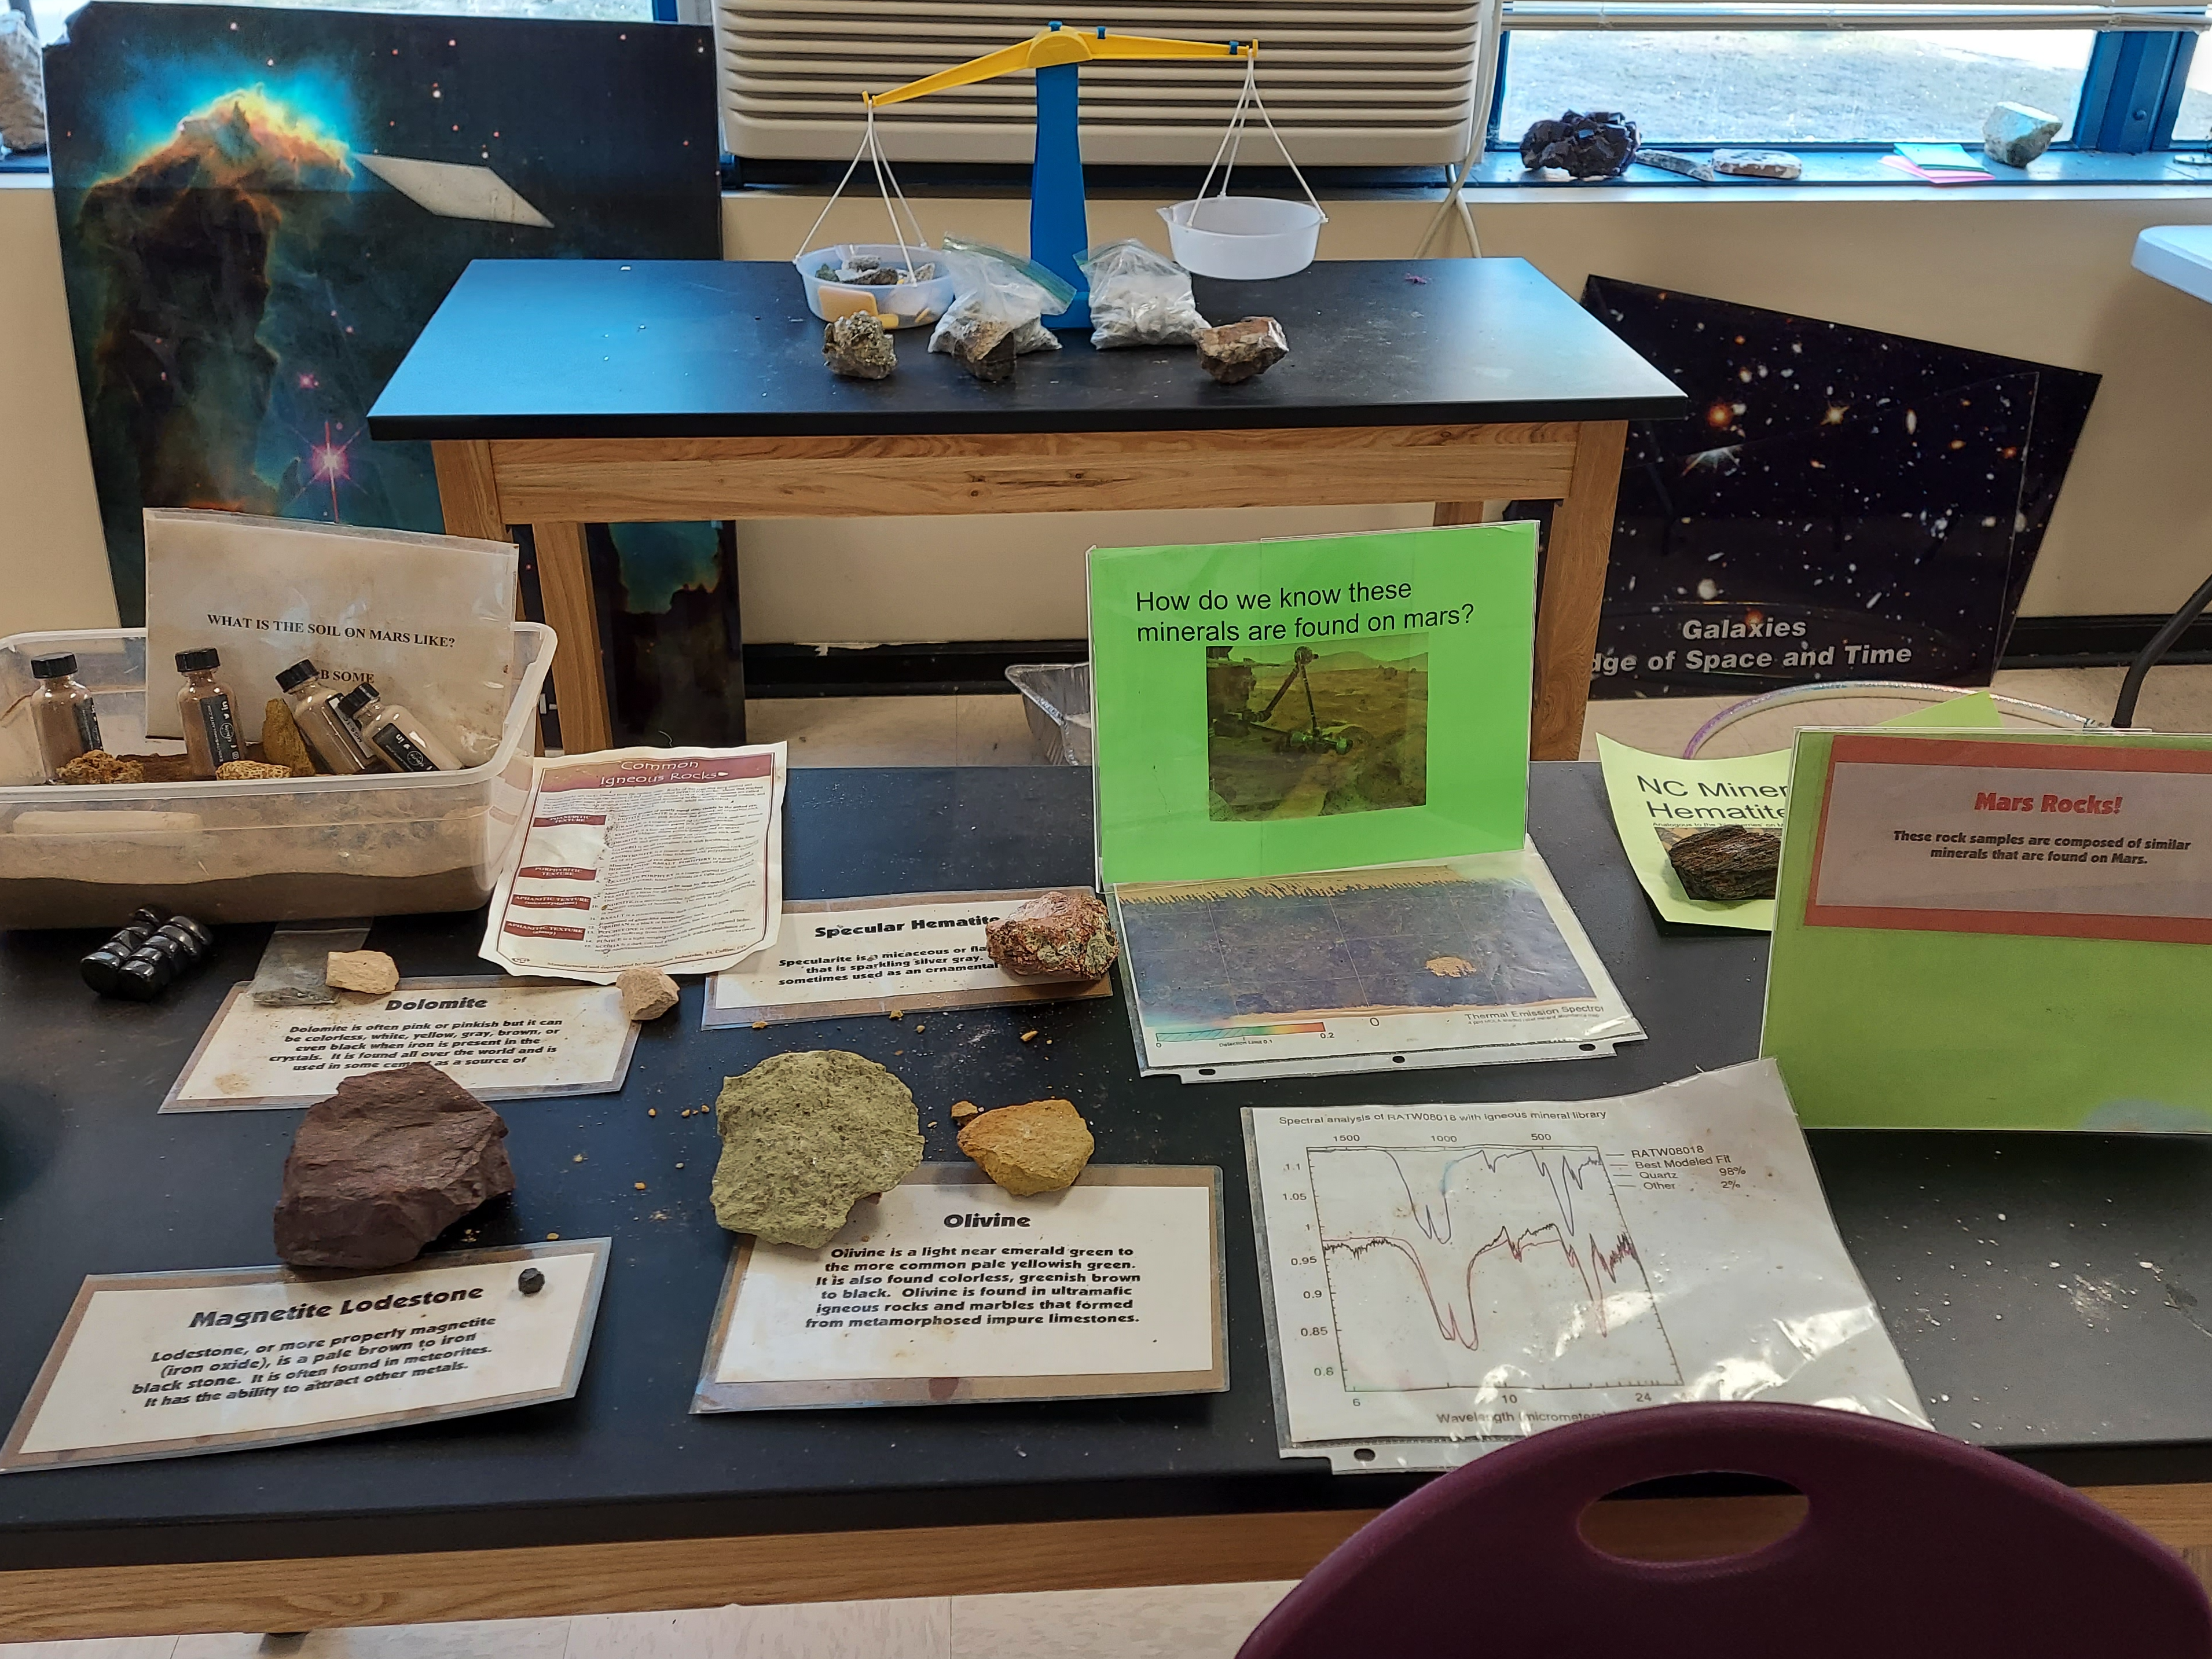 Mineral and soil samples  are  analogs of the real Martian minerals. We use spectroscopy to determine what minerals are present on Mars, even though humans have yet to go there.